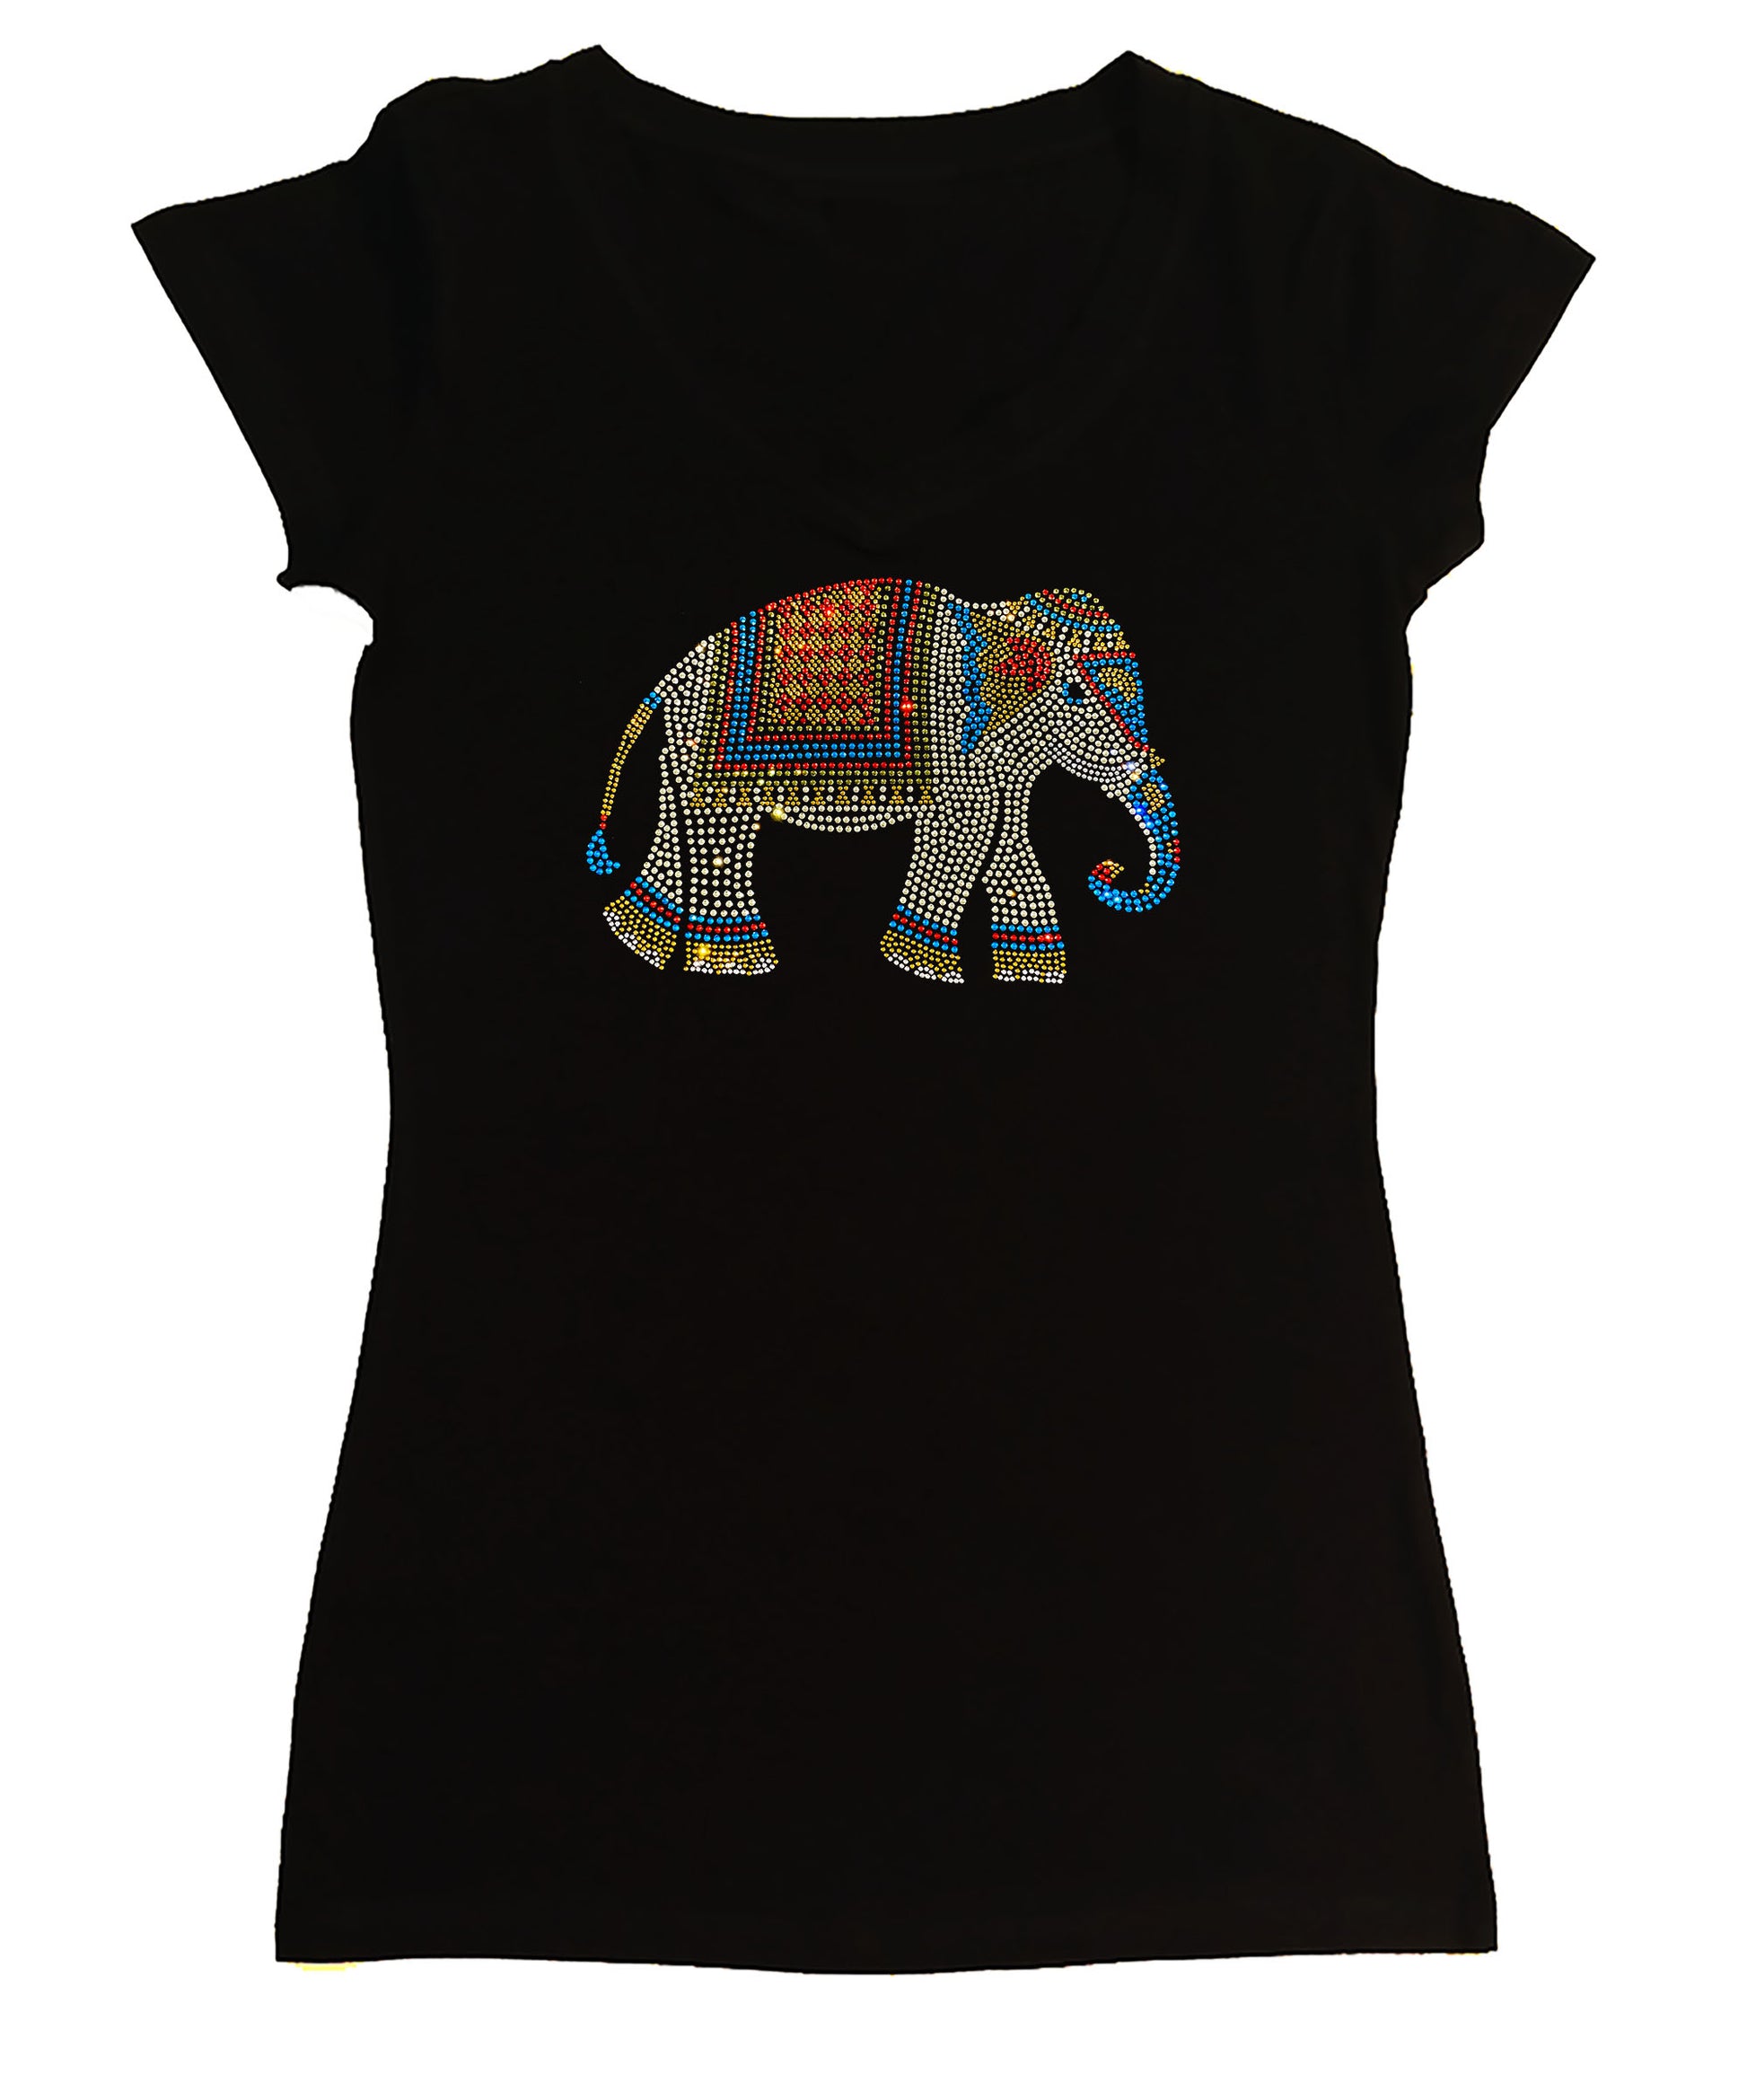 Women's Rhinestone Fitted Tight Snug Shirt Colorful Indian Elephant